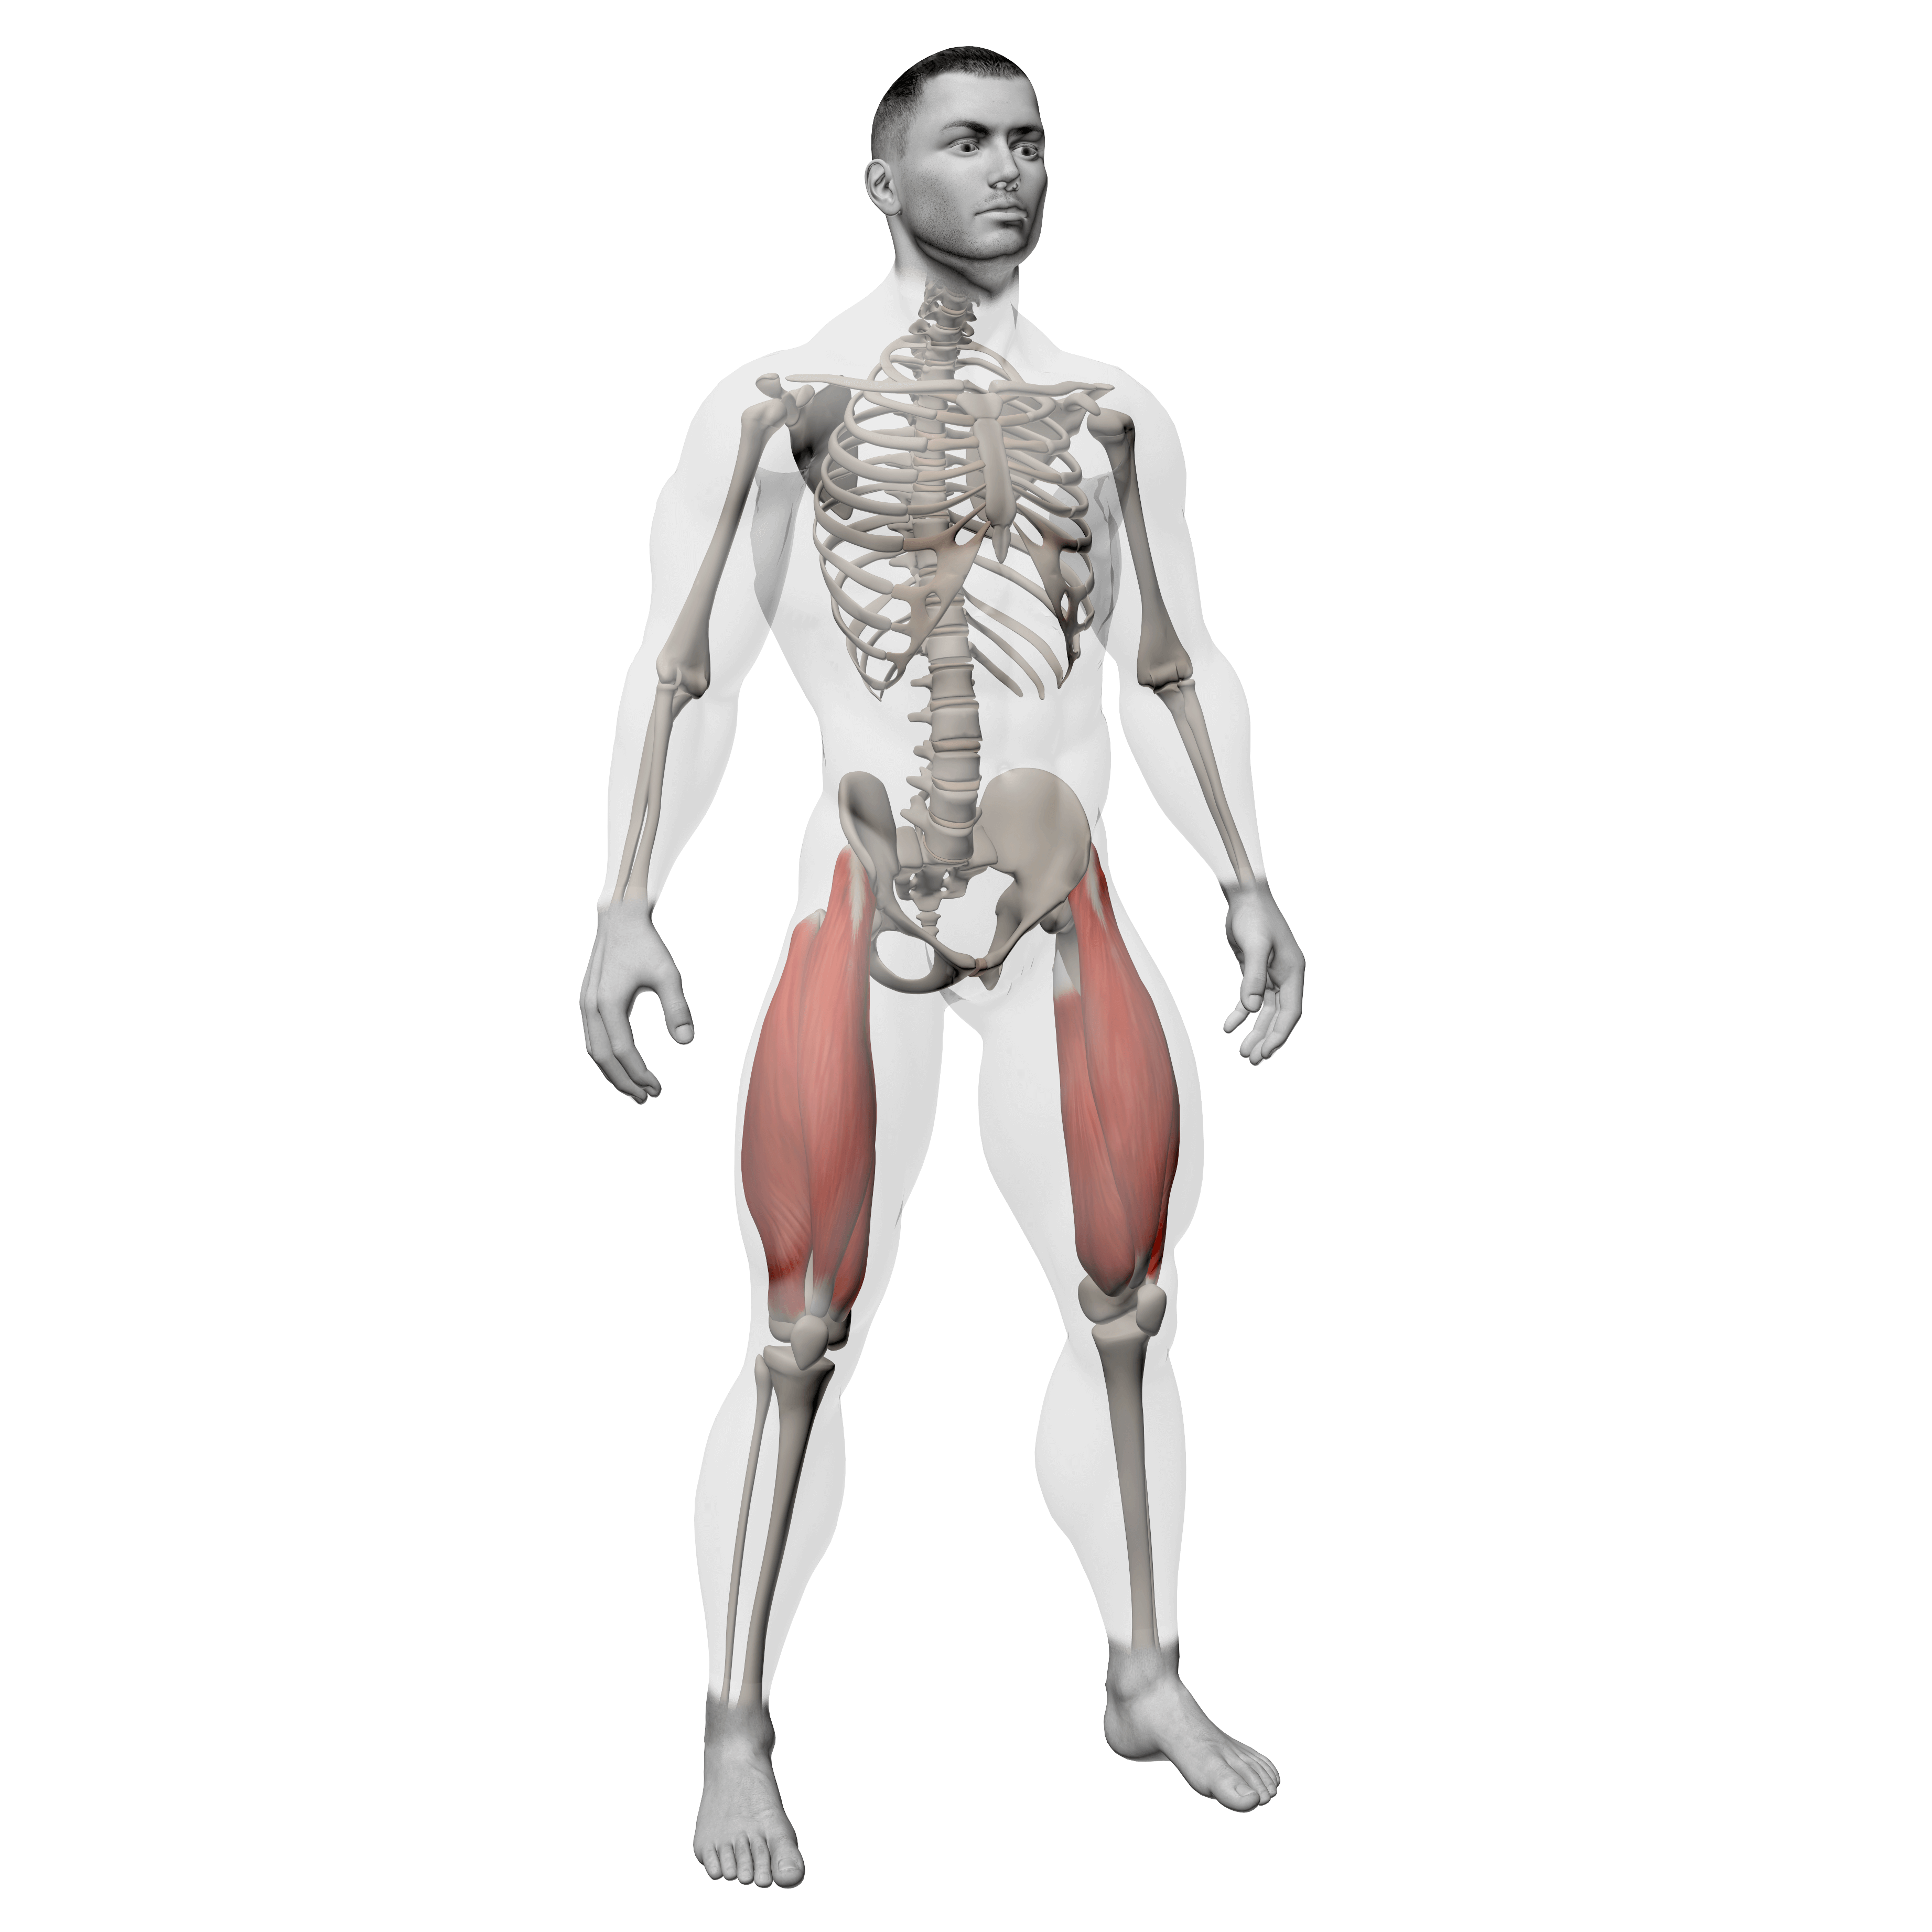 x-ray illustration showing quadriceps to demonstrate what muscles squats work